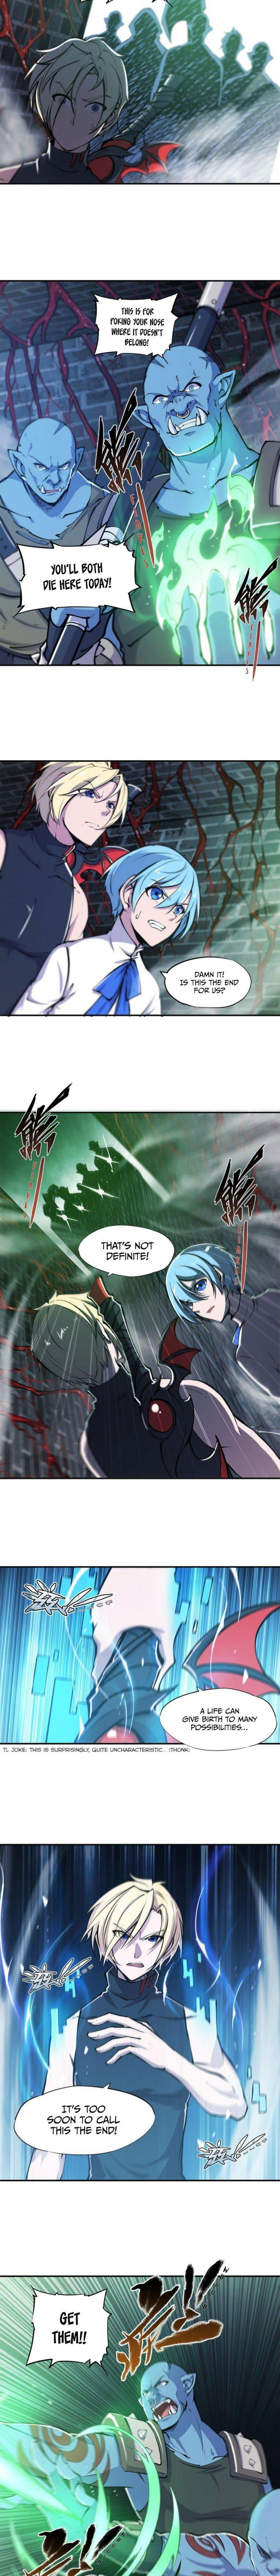 The Blood Princess and the Knight Chapter 82 page 5